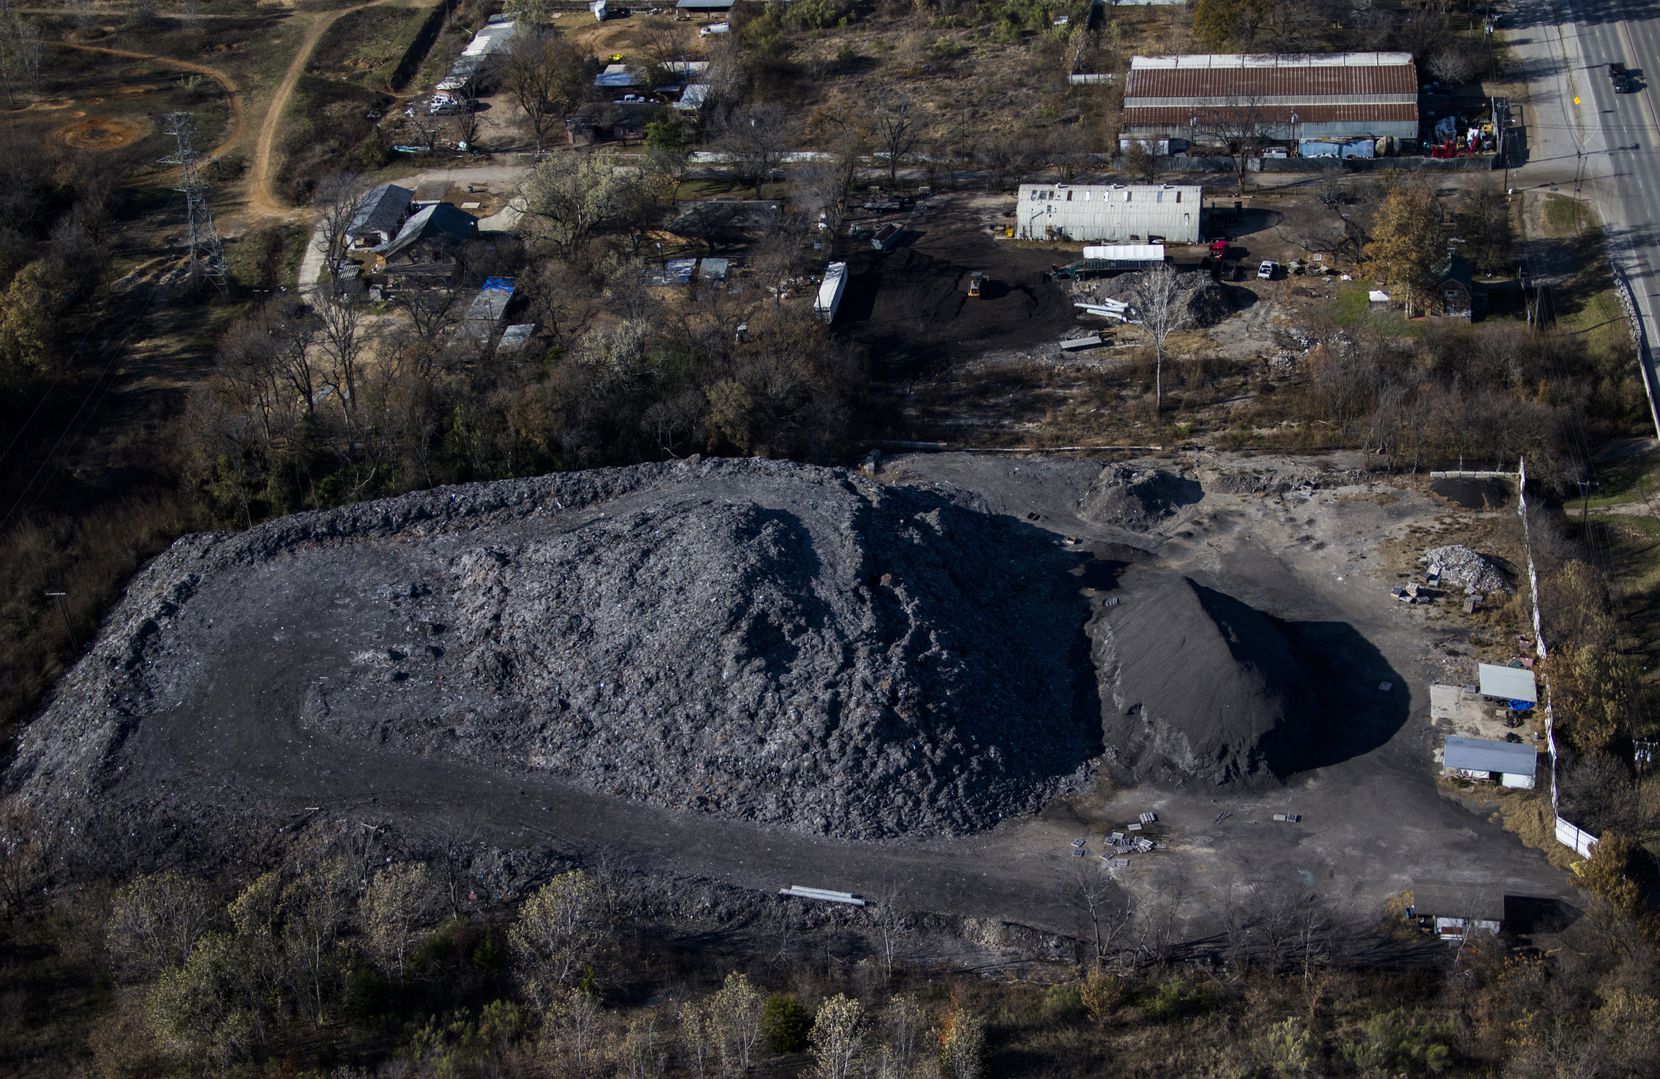 Shingle Mountain, as seen from the air off S. Central Expressway and Choate Road on November 19, 2019